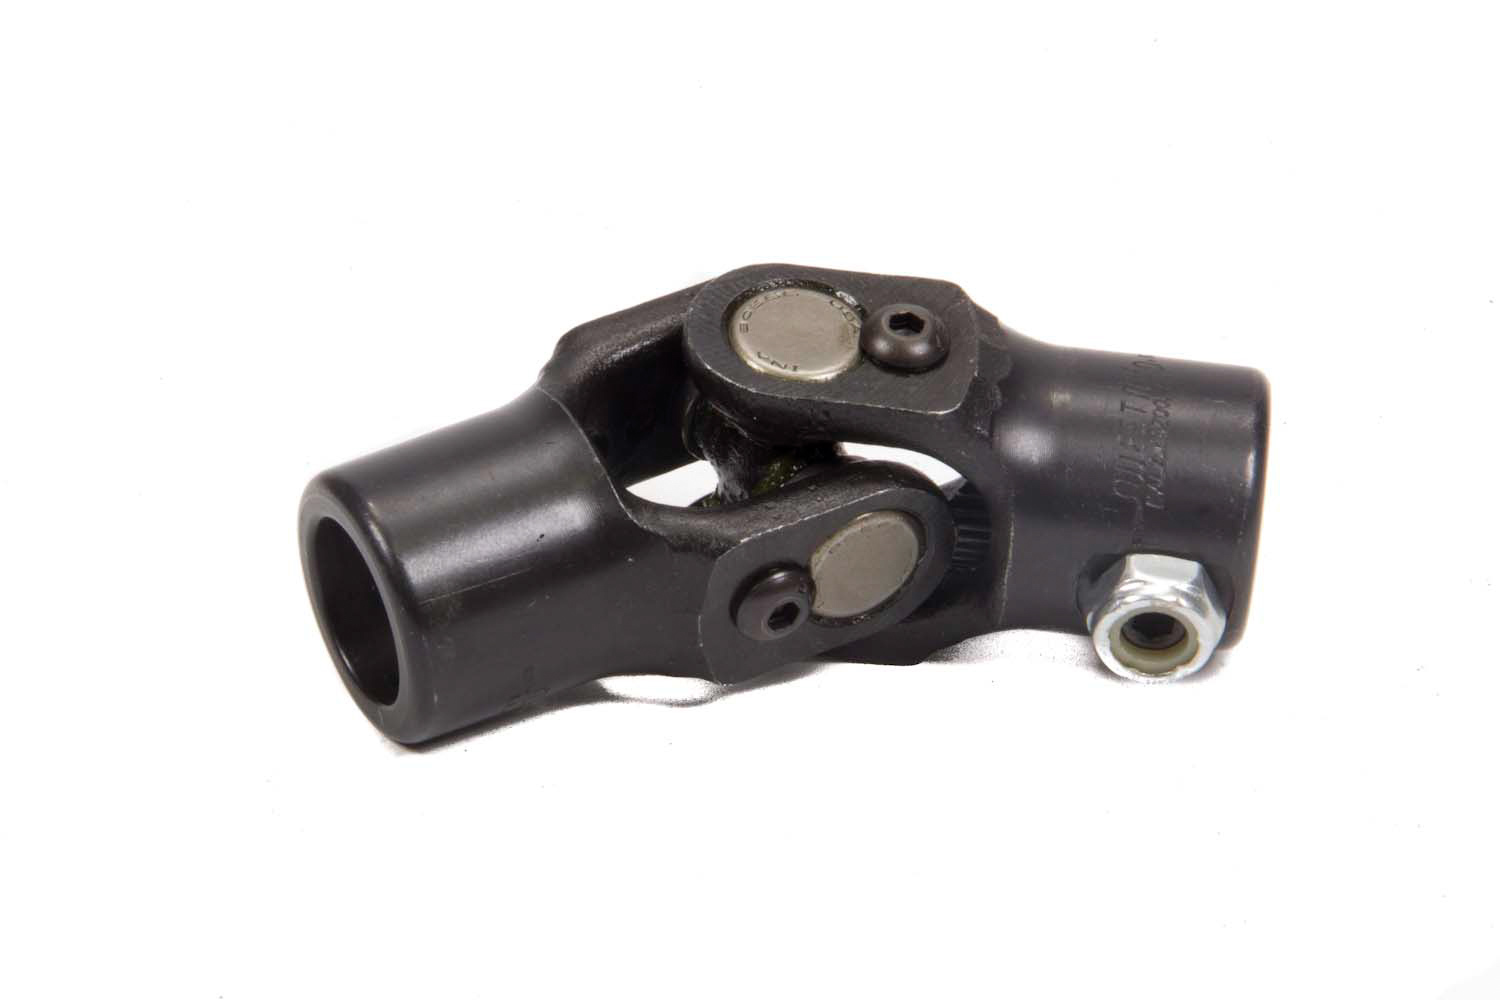 Steering Universal Joint - Single Joint - 3/4 in Smooth Bore to 9/16 in 26 Spline - Steel - Black Paint - Each